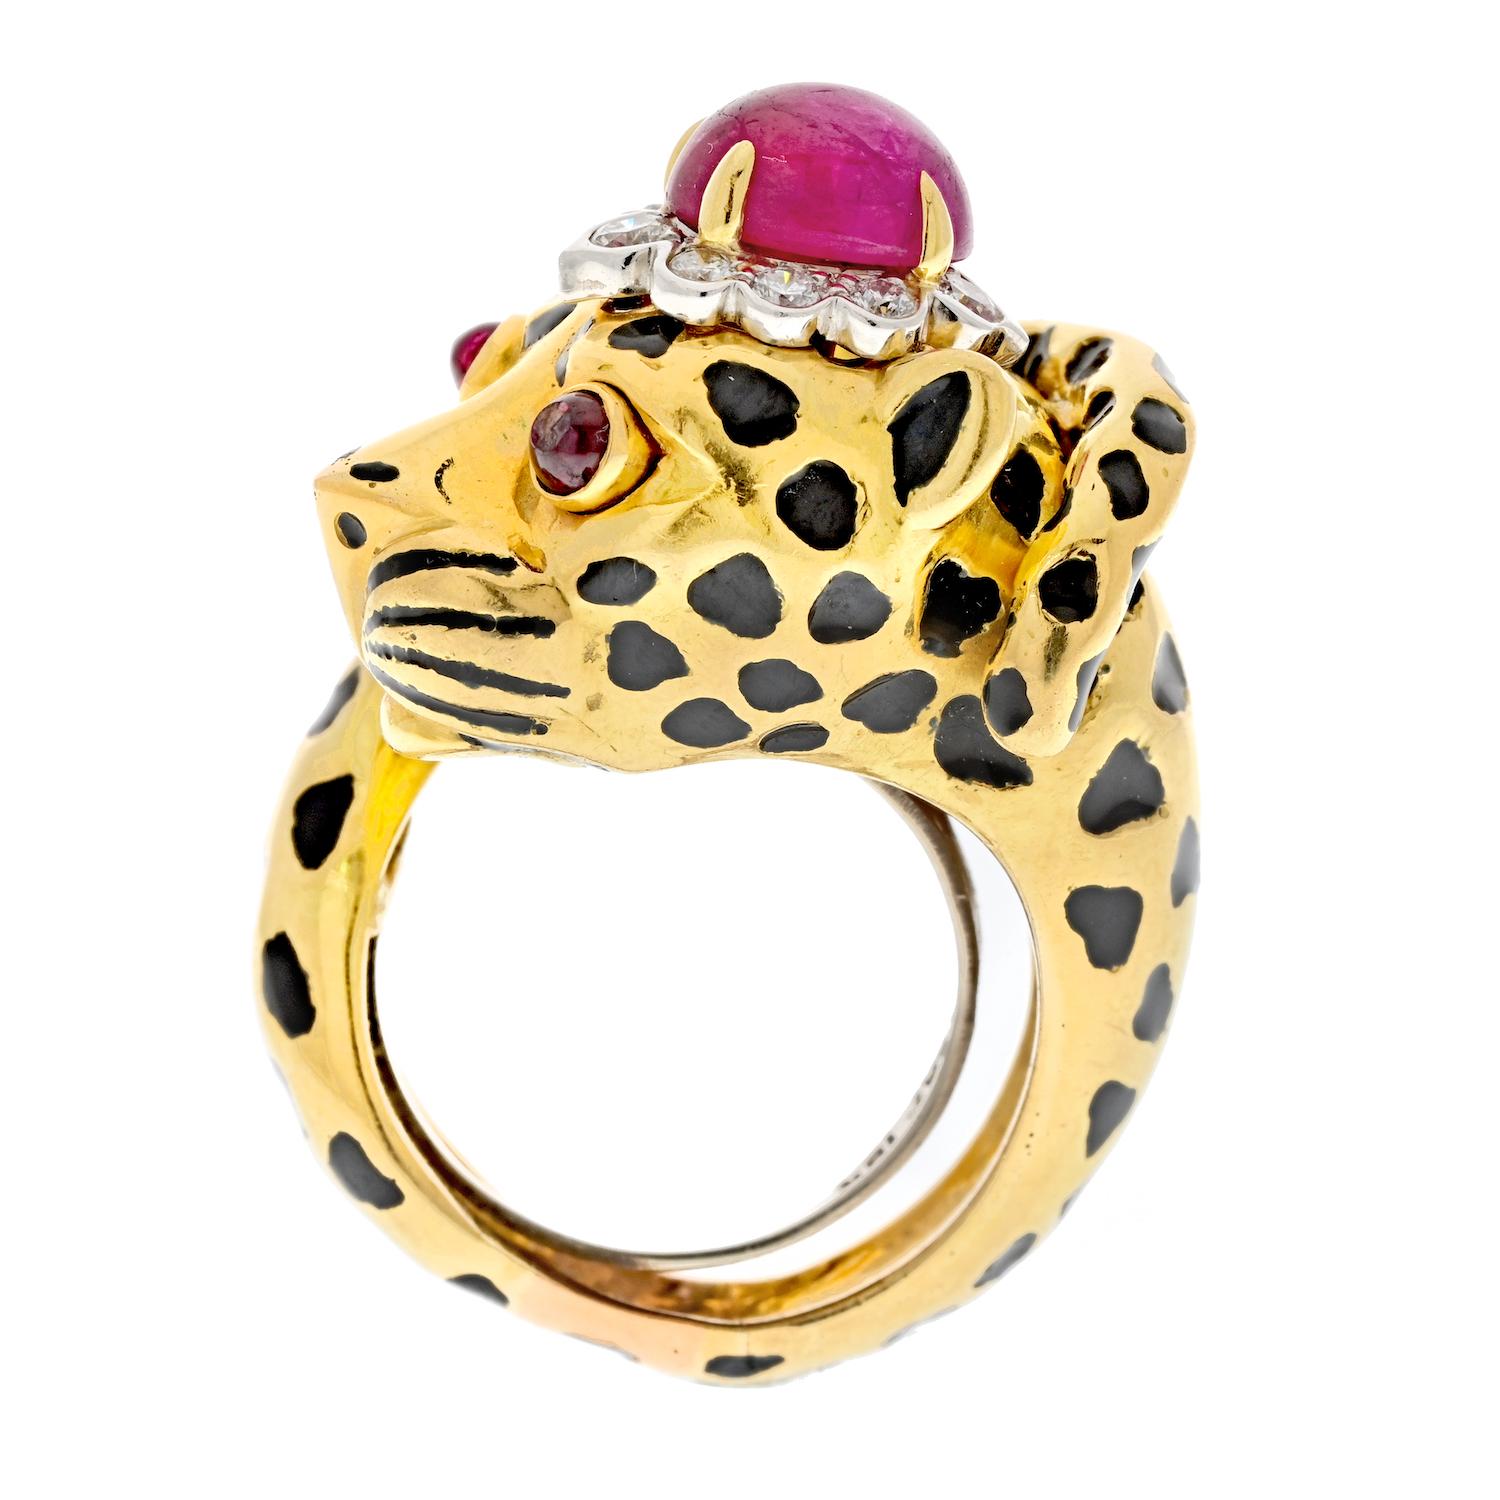 The stunning David Webb 18k Yellow Gold Leopard Ring - a true masterpiece of fine jewelry design. This exquisite ring features a beautifully detailed leopard crafted from luxurious 18k yellow gold, with a sleek and elegant design that is both bold